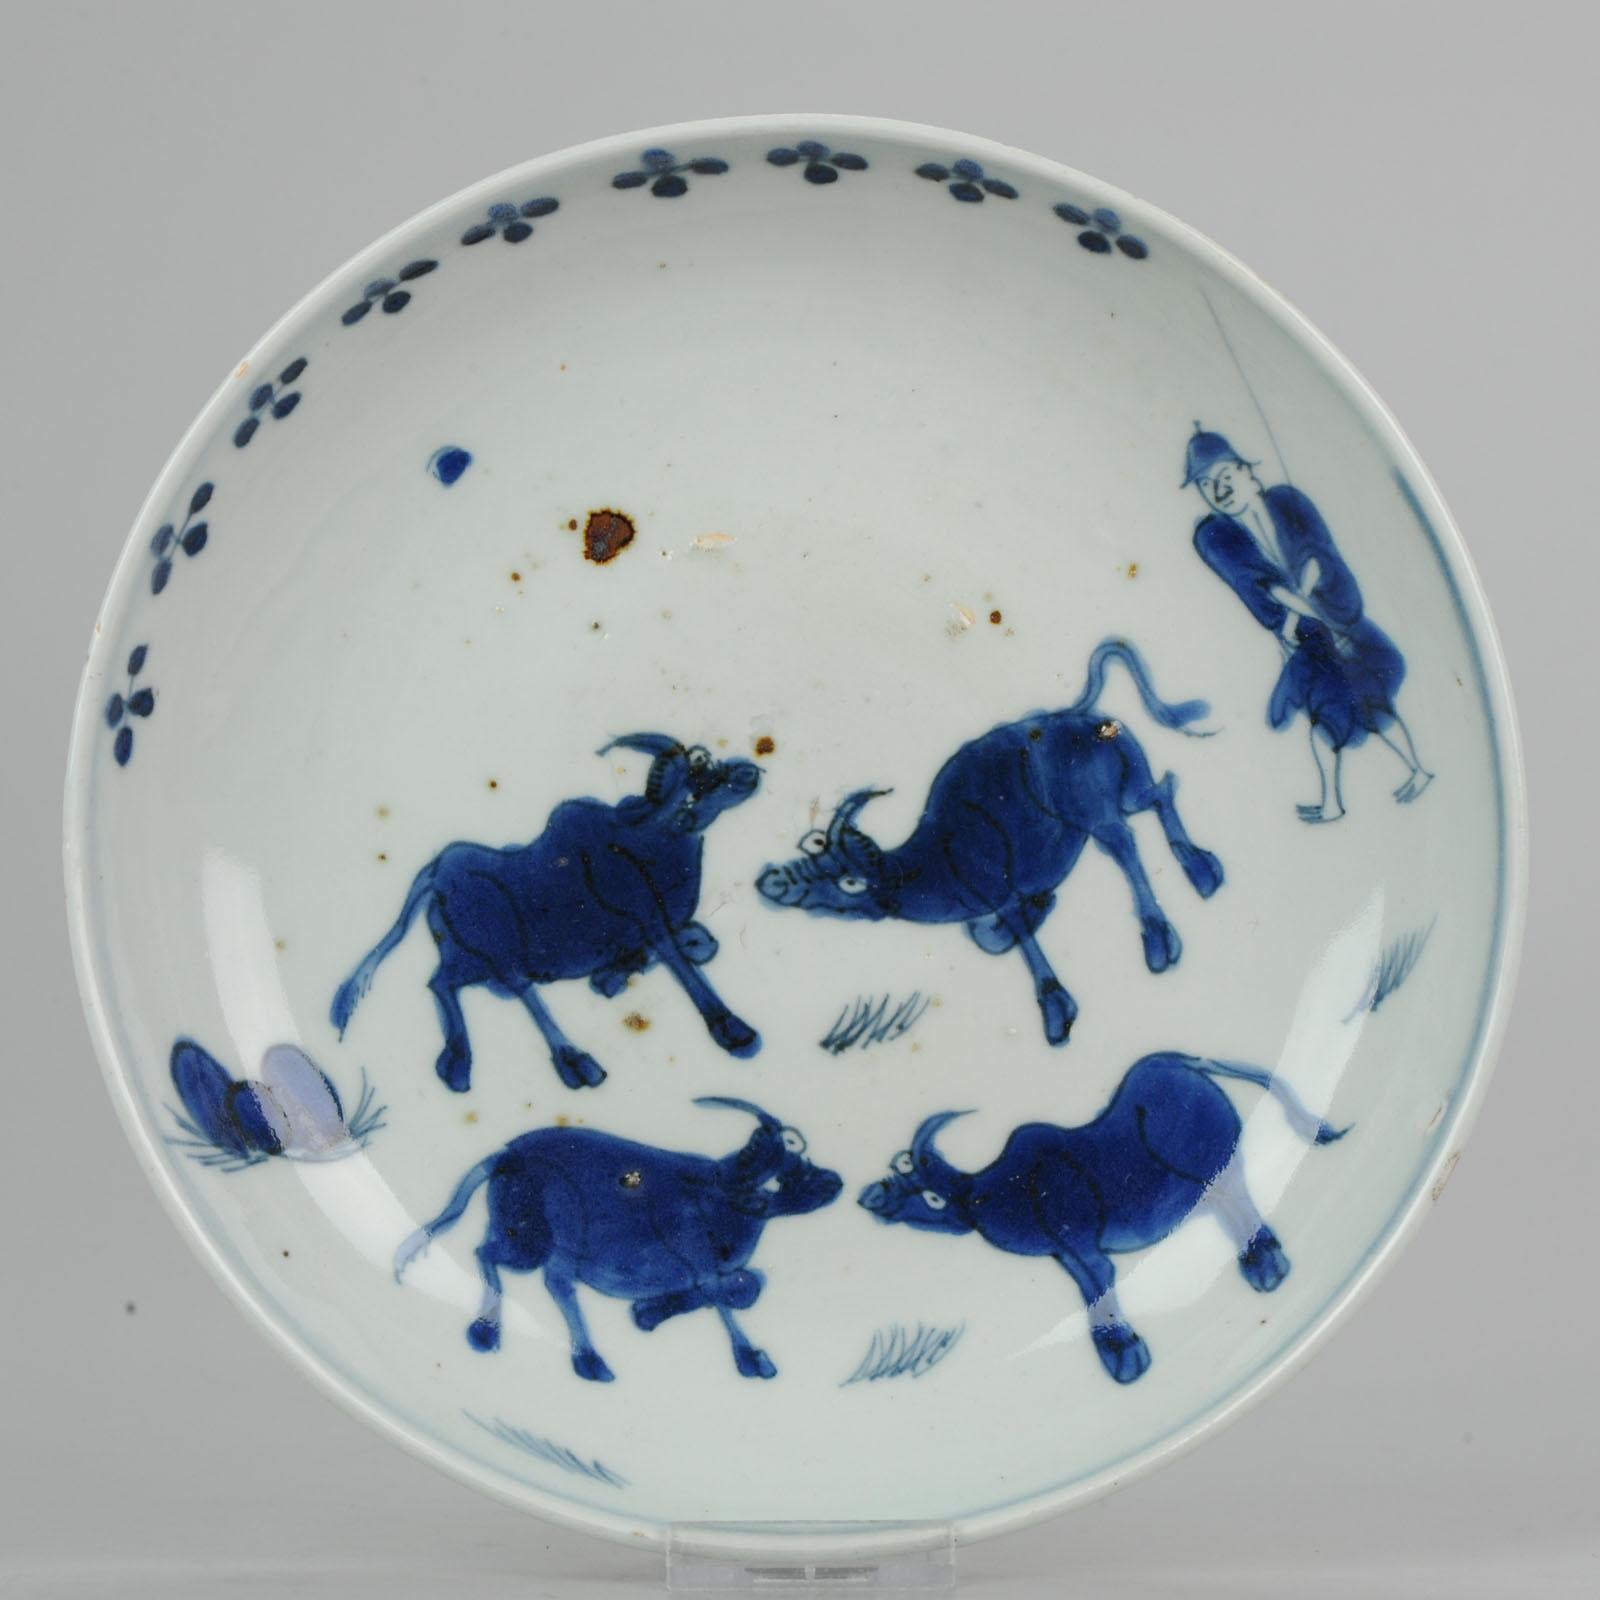 18th Century and Earlier Antique Chinese circa 1600-1640 C Porcelain China Plate Cows and Shepperd For Sale